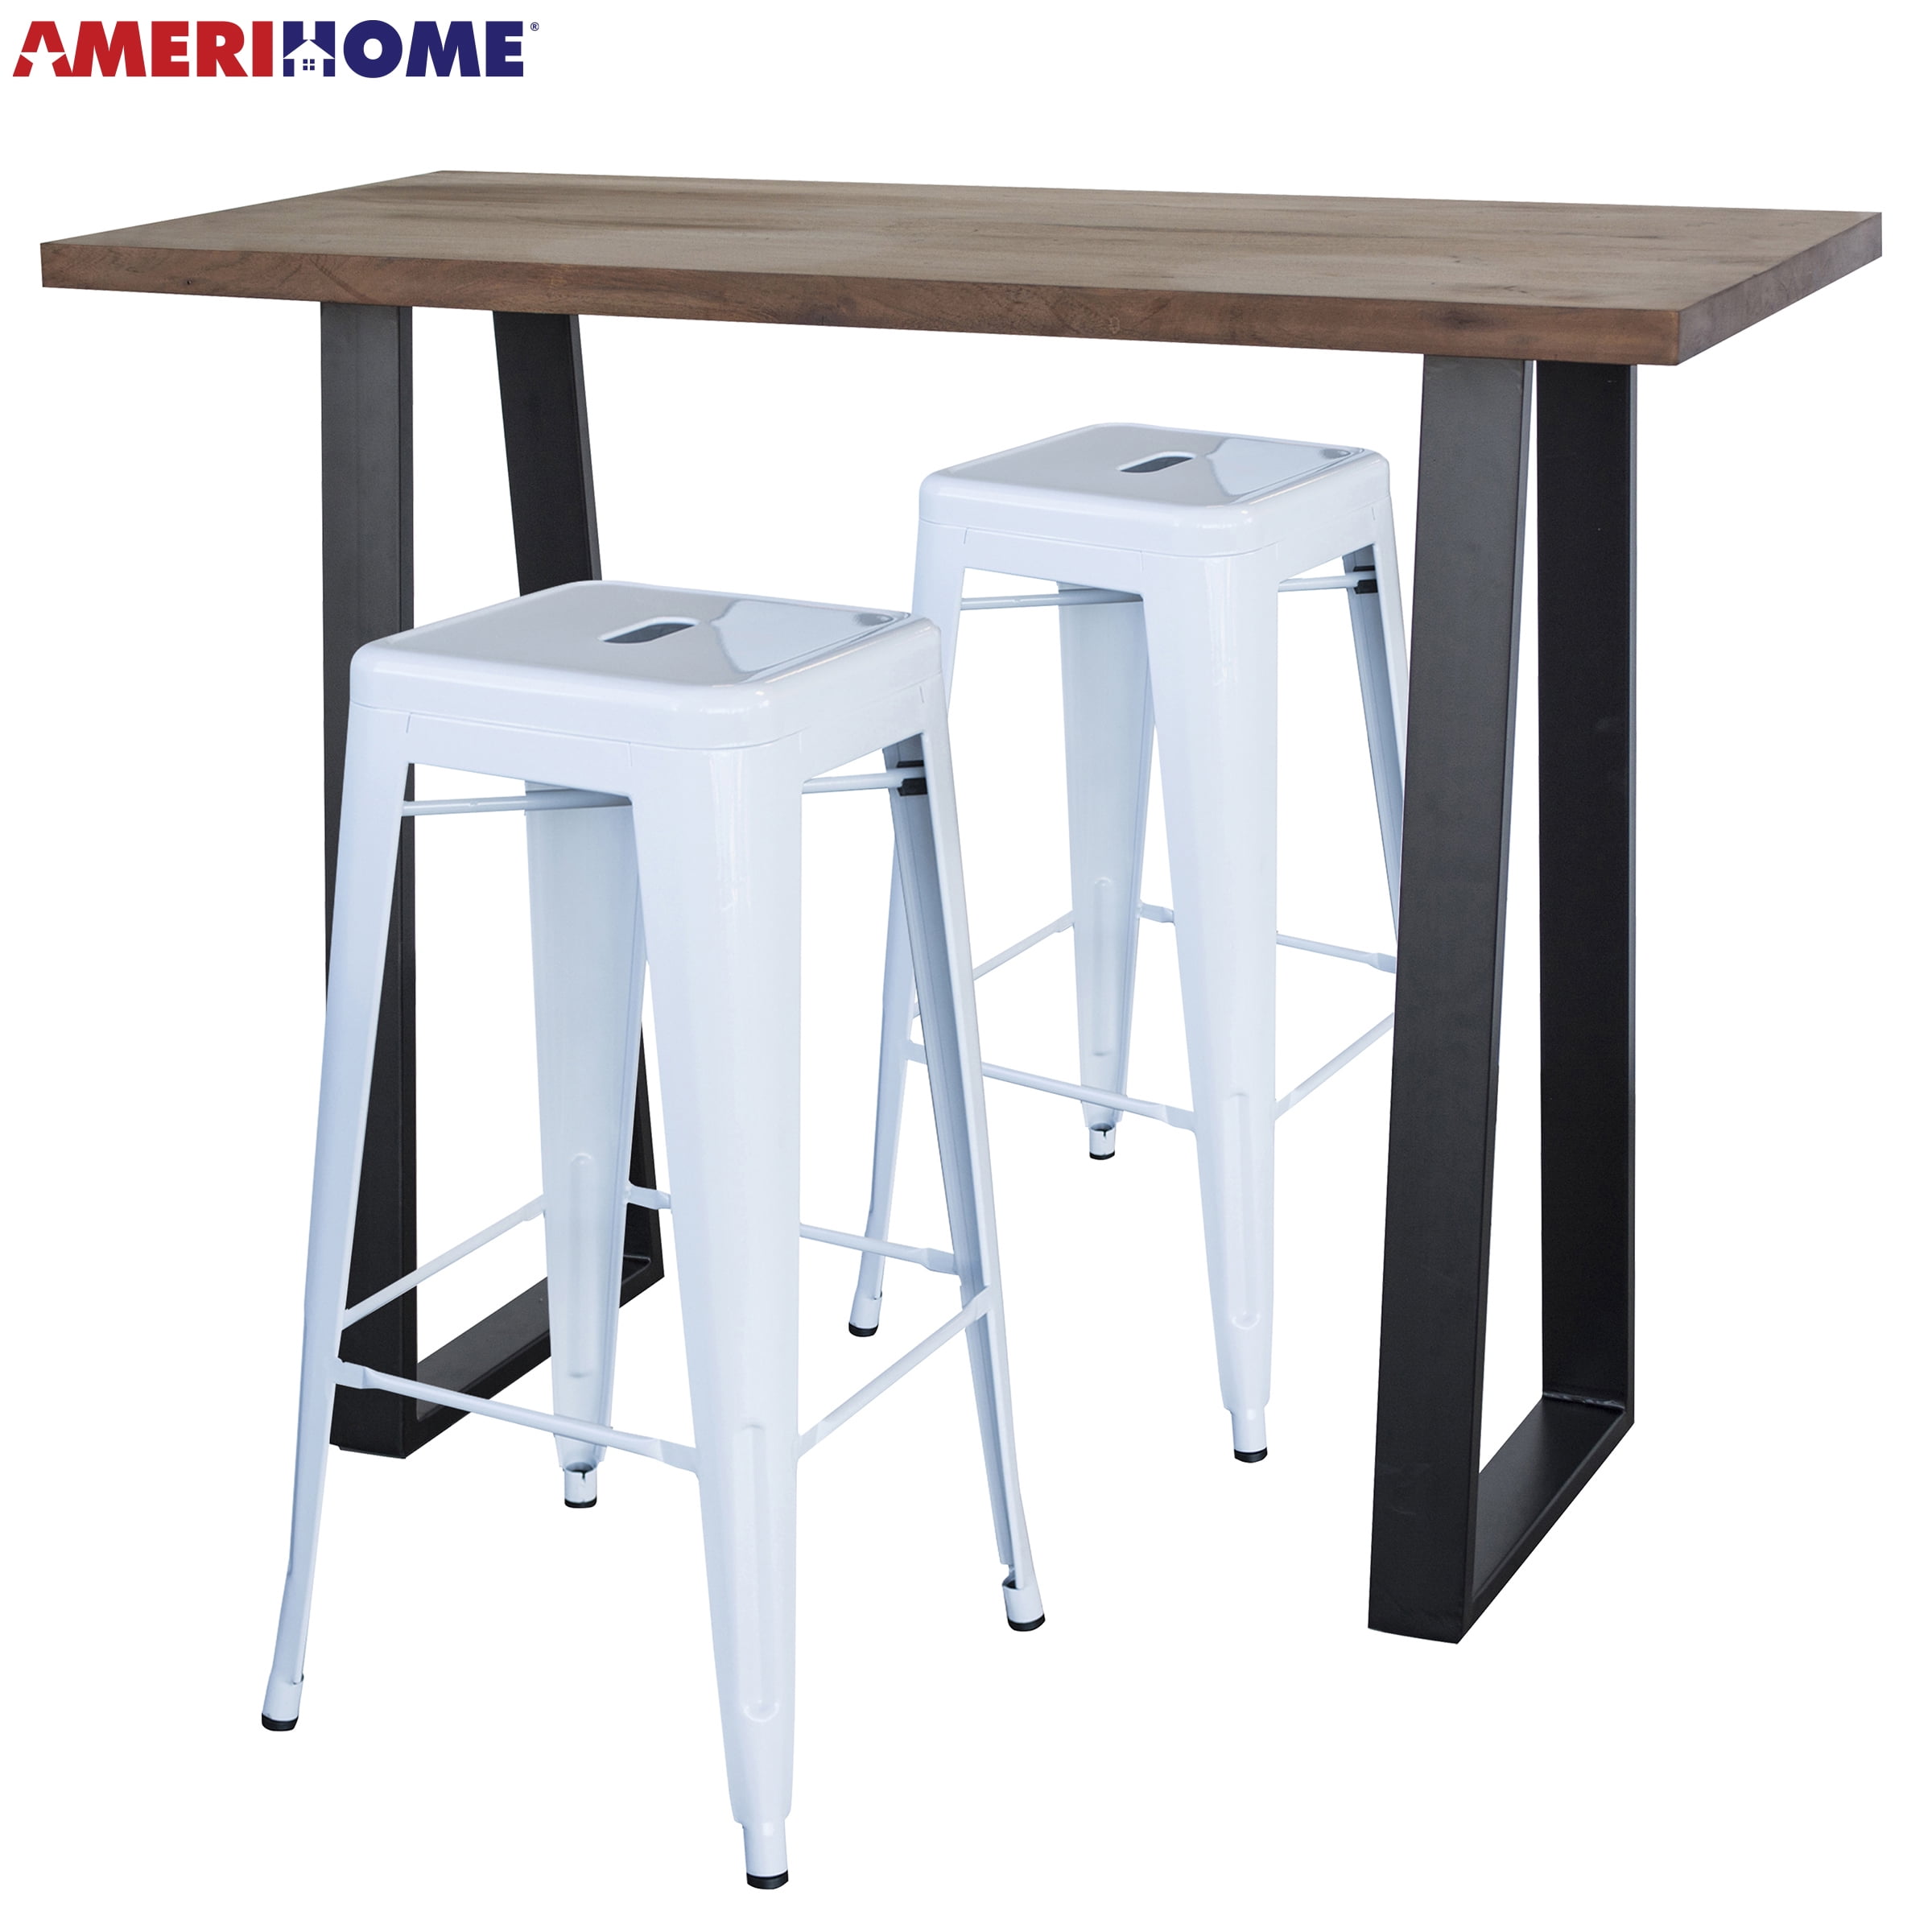 Picture of AmeriHome AWBTW2 Acacia Wood Top Bar Height Pub Set with White Bar Stools - White&#44; Black & Natural Wood - 3 Piece